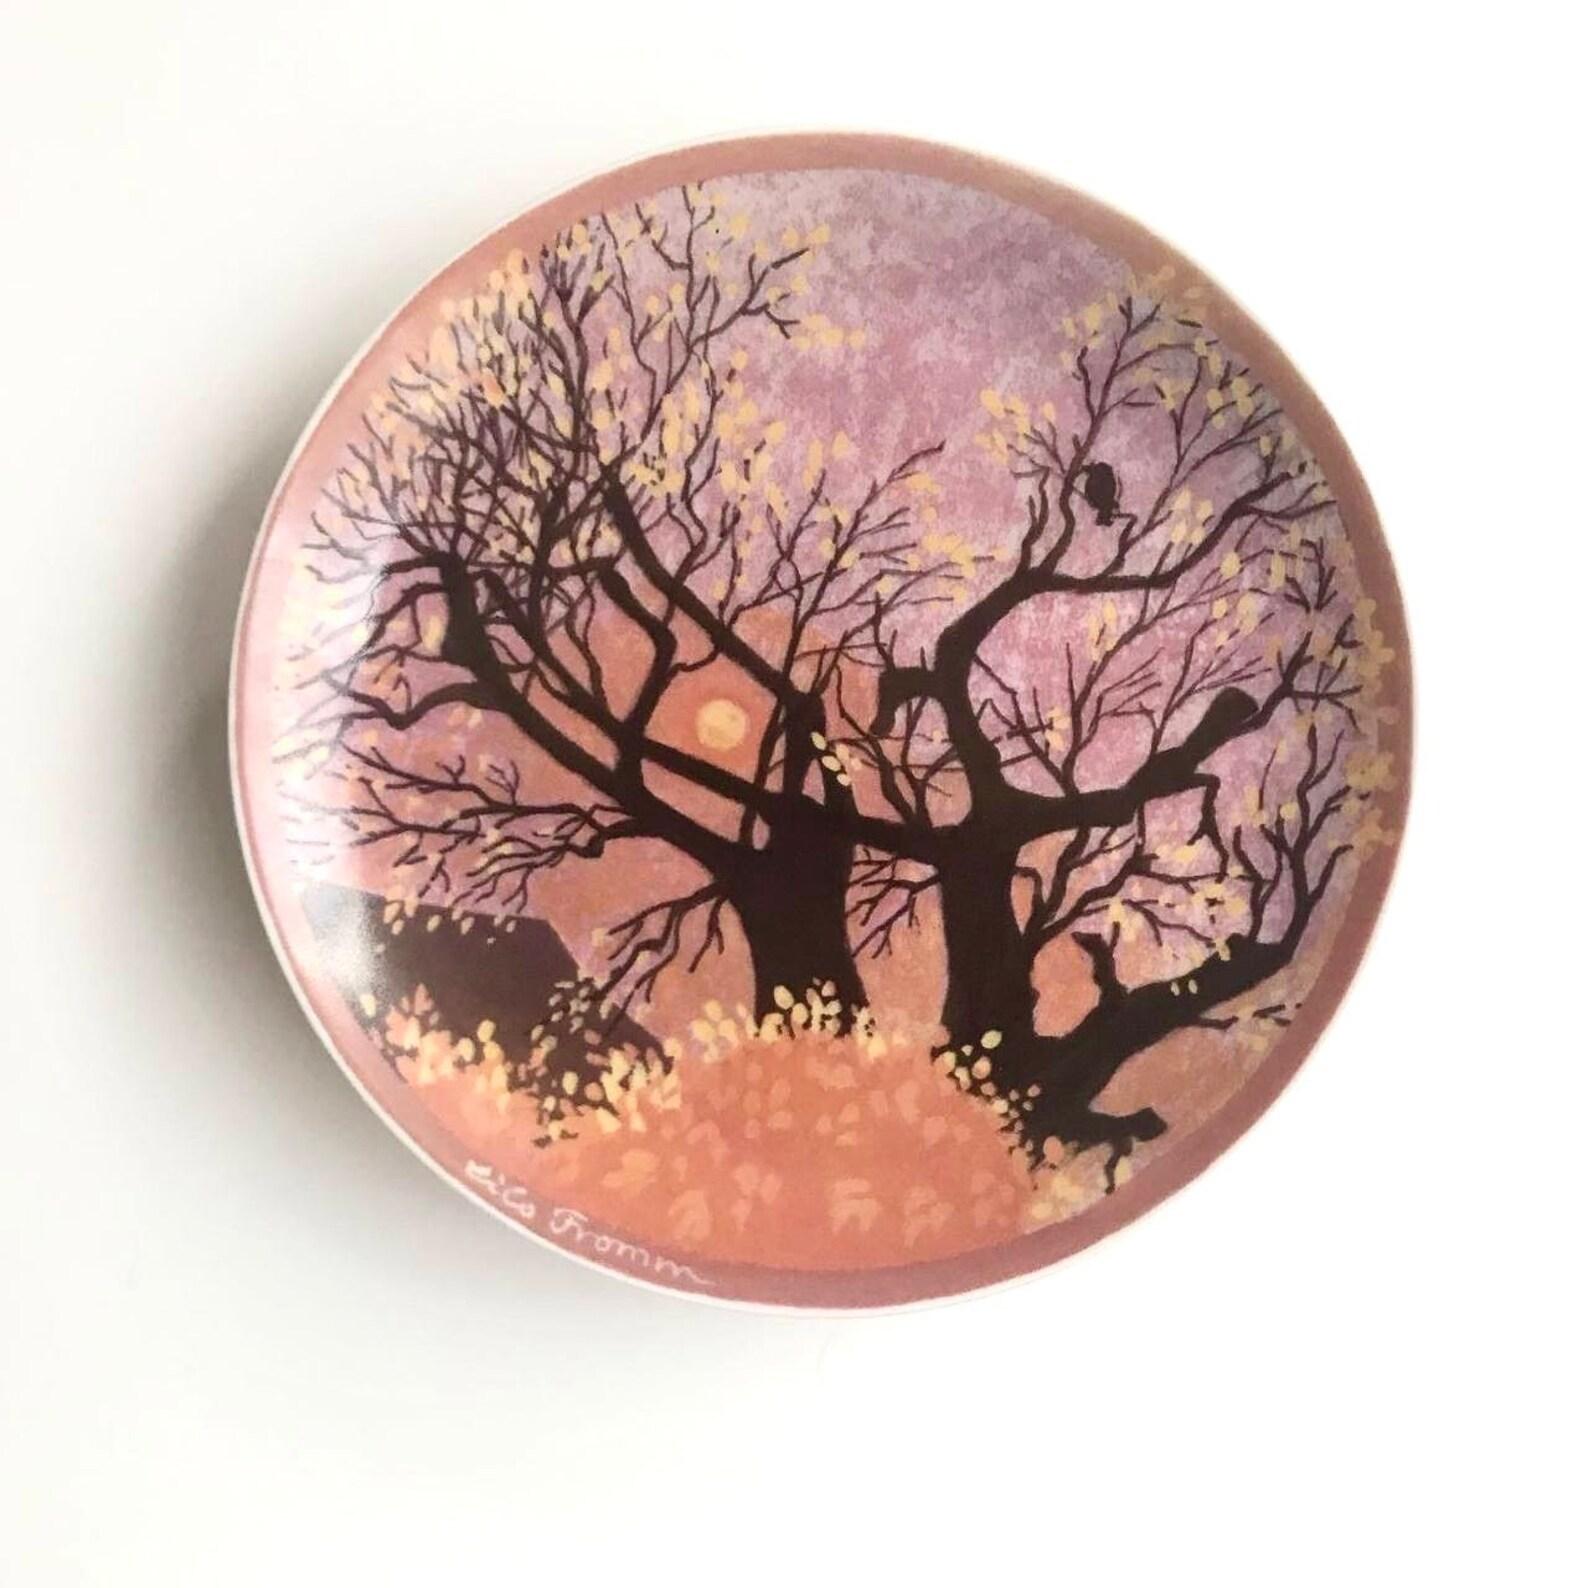 Lilo Fromm decorative plates sophienthal wall plates “Autumn” series “Seasons” 

Rare Decorative Plates “Autumn” from the Series of “Season”. Sophienthal.

Designer Lilo Fromm.

If you will take 3 Plates the delivery is FREE for